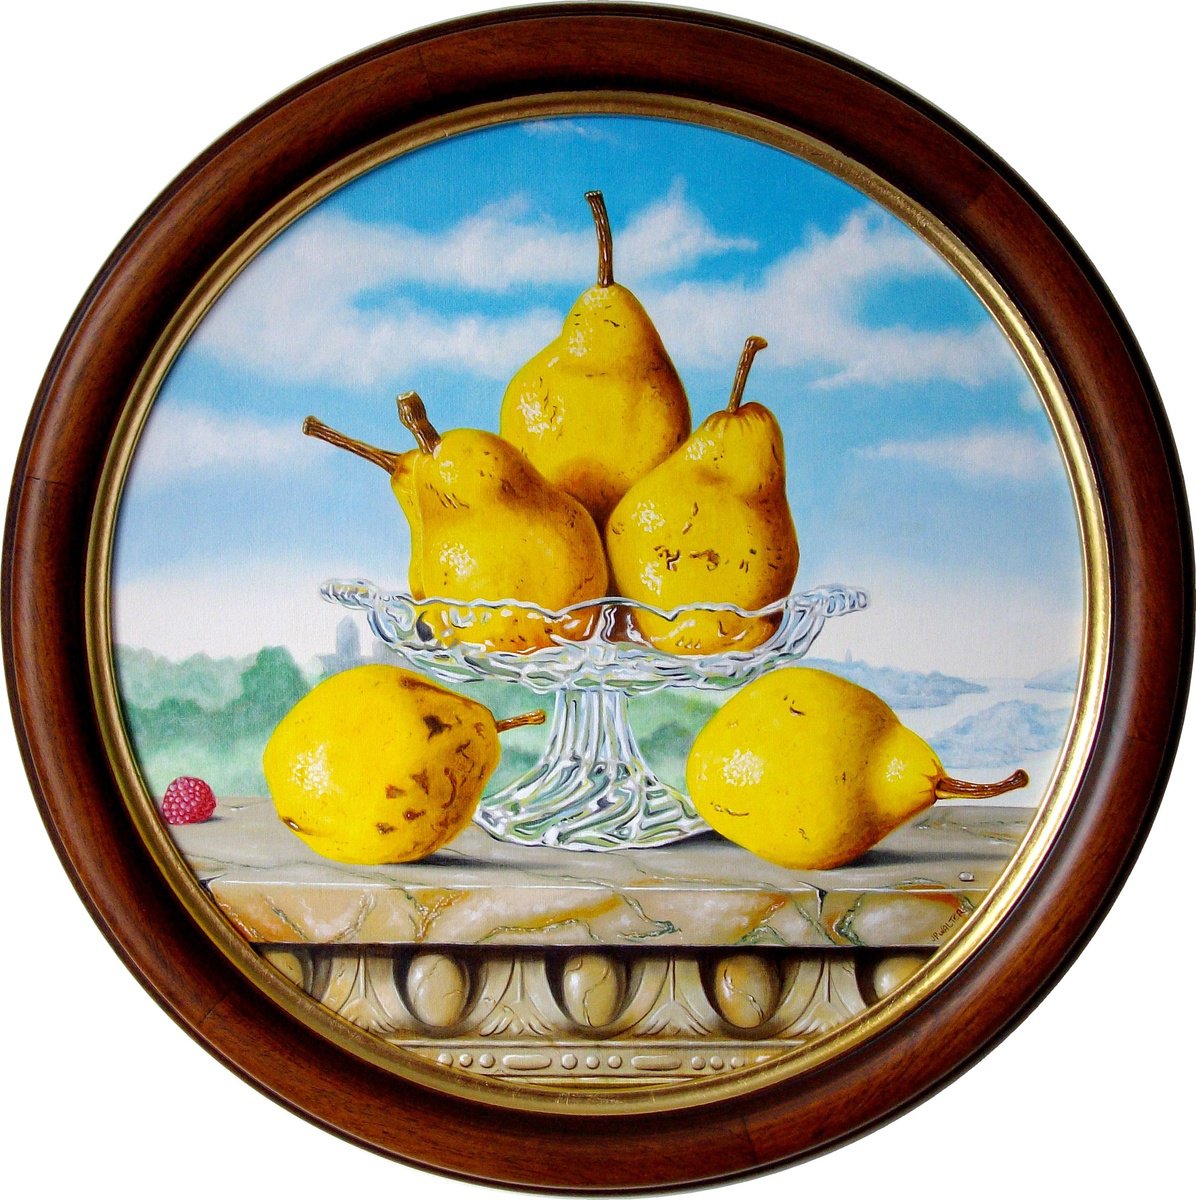 Glass bowl with pears at Ambrosius Bosschaert by Jean-Pierre Walter